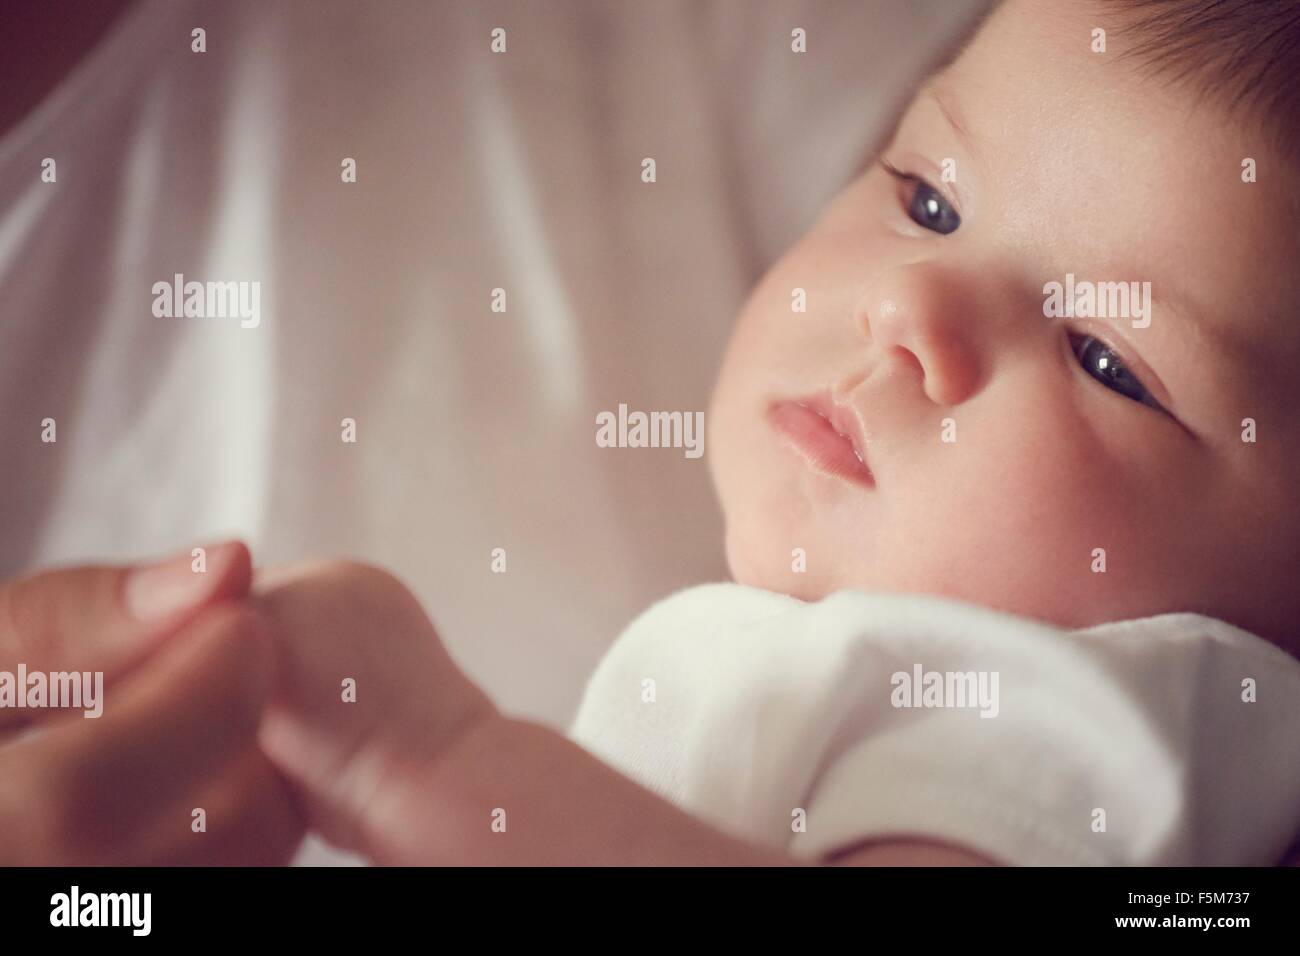 Mother holding baby's fingers Stock Photo